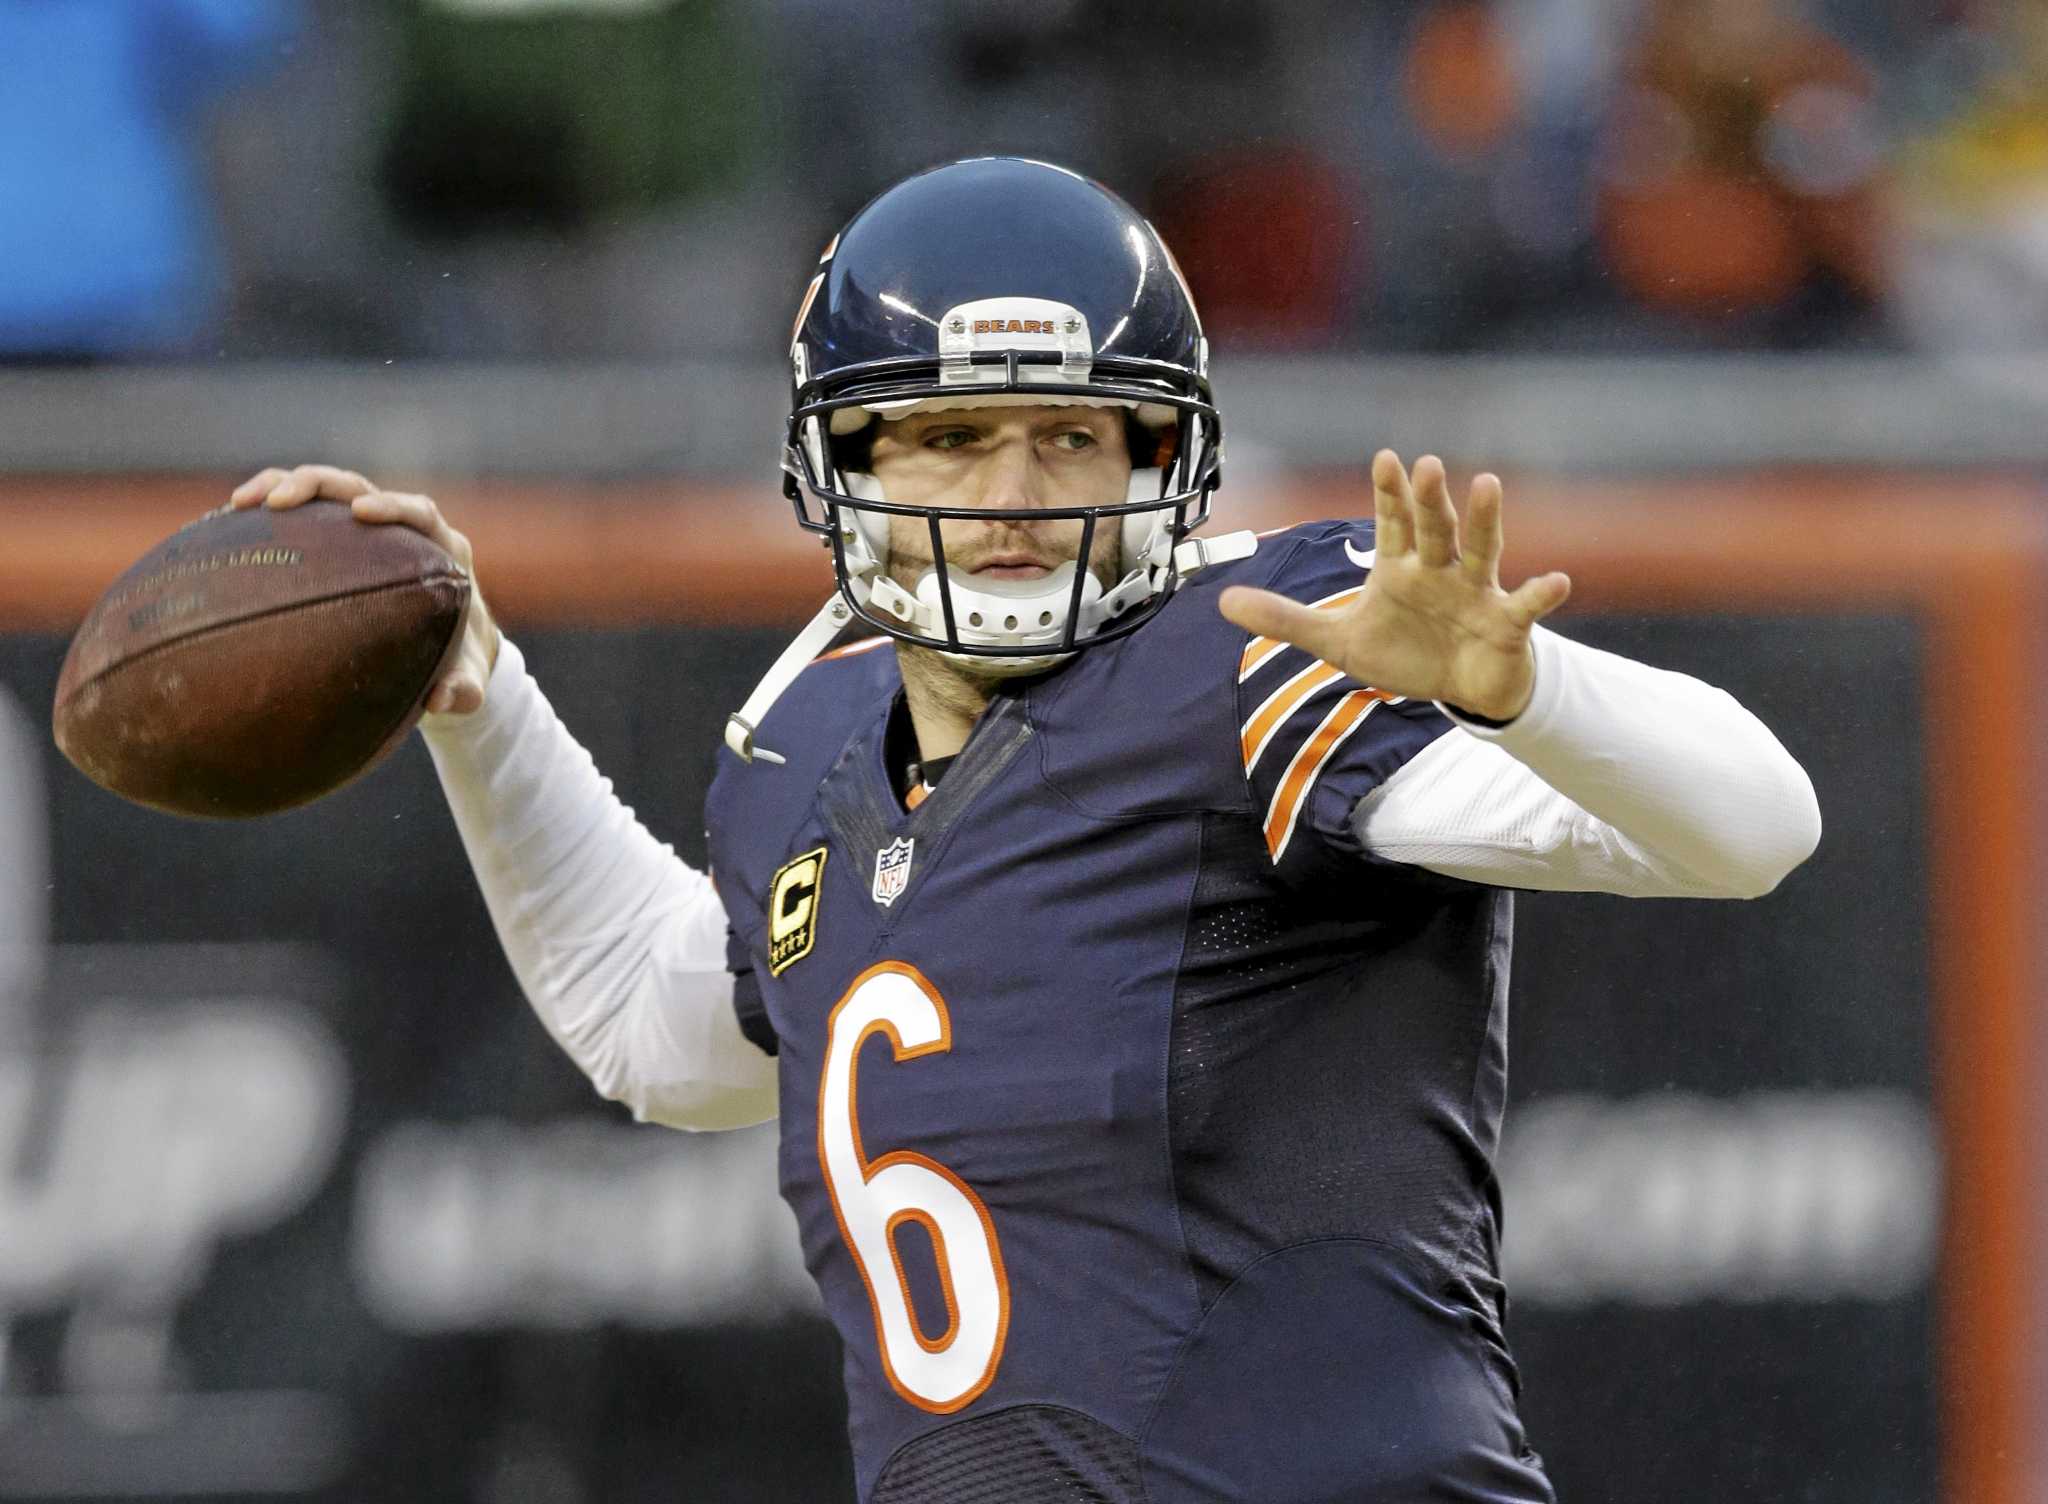 Bears sign Jay Cutler to seven-year contract - NBC Sports